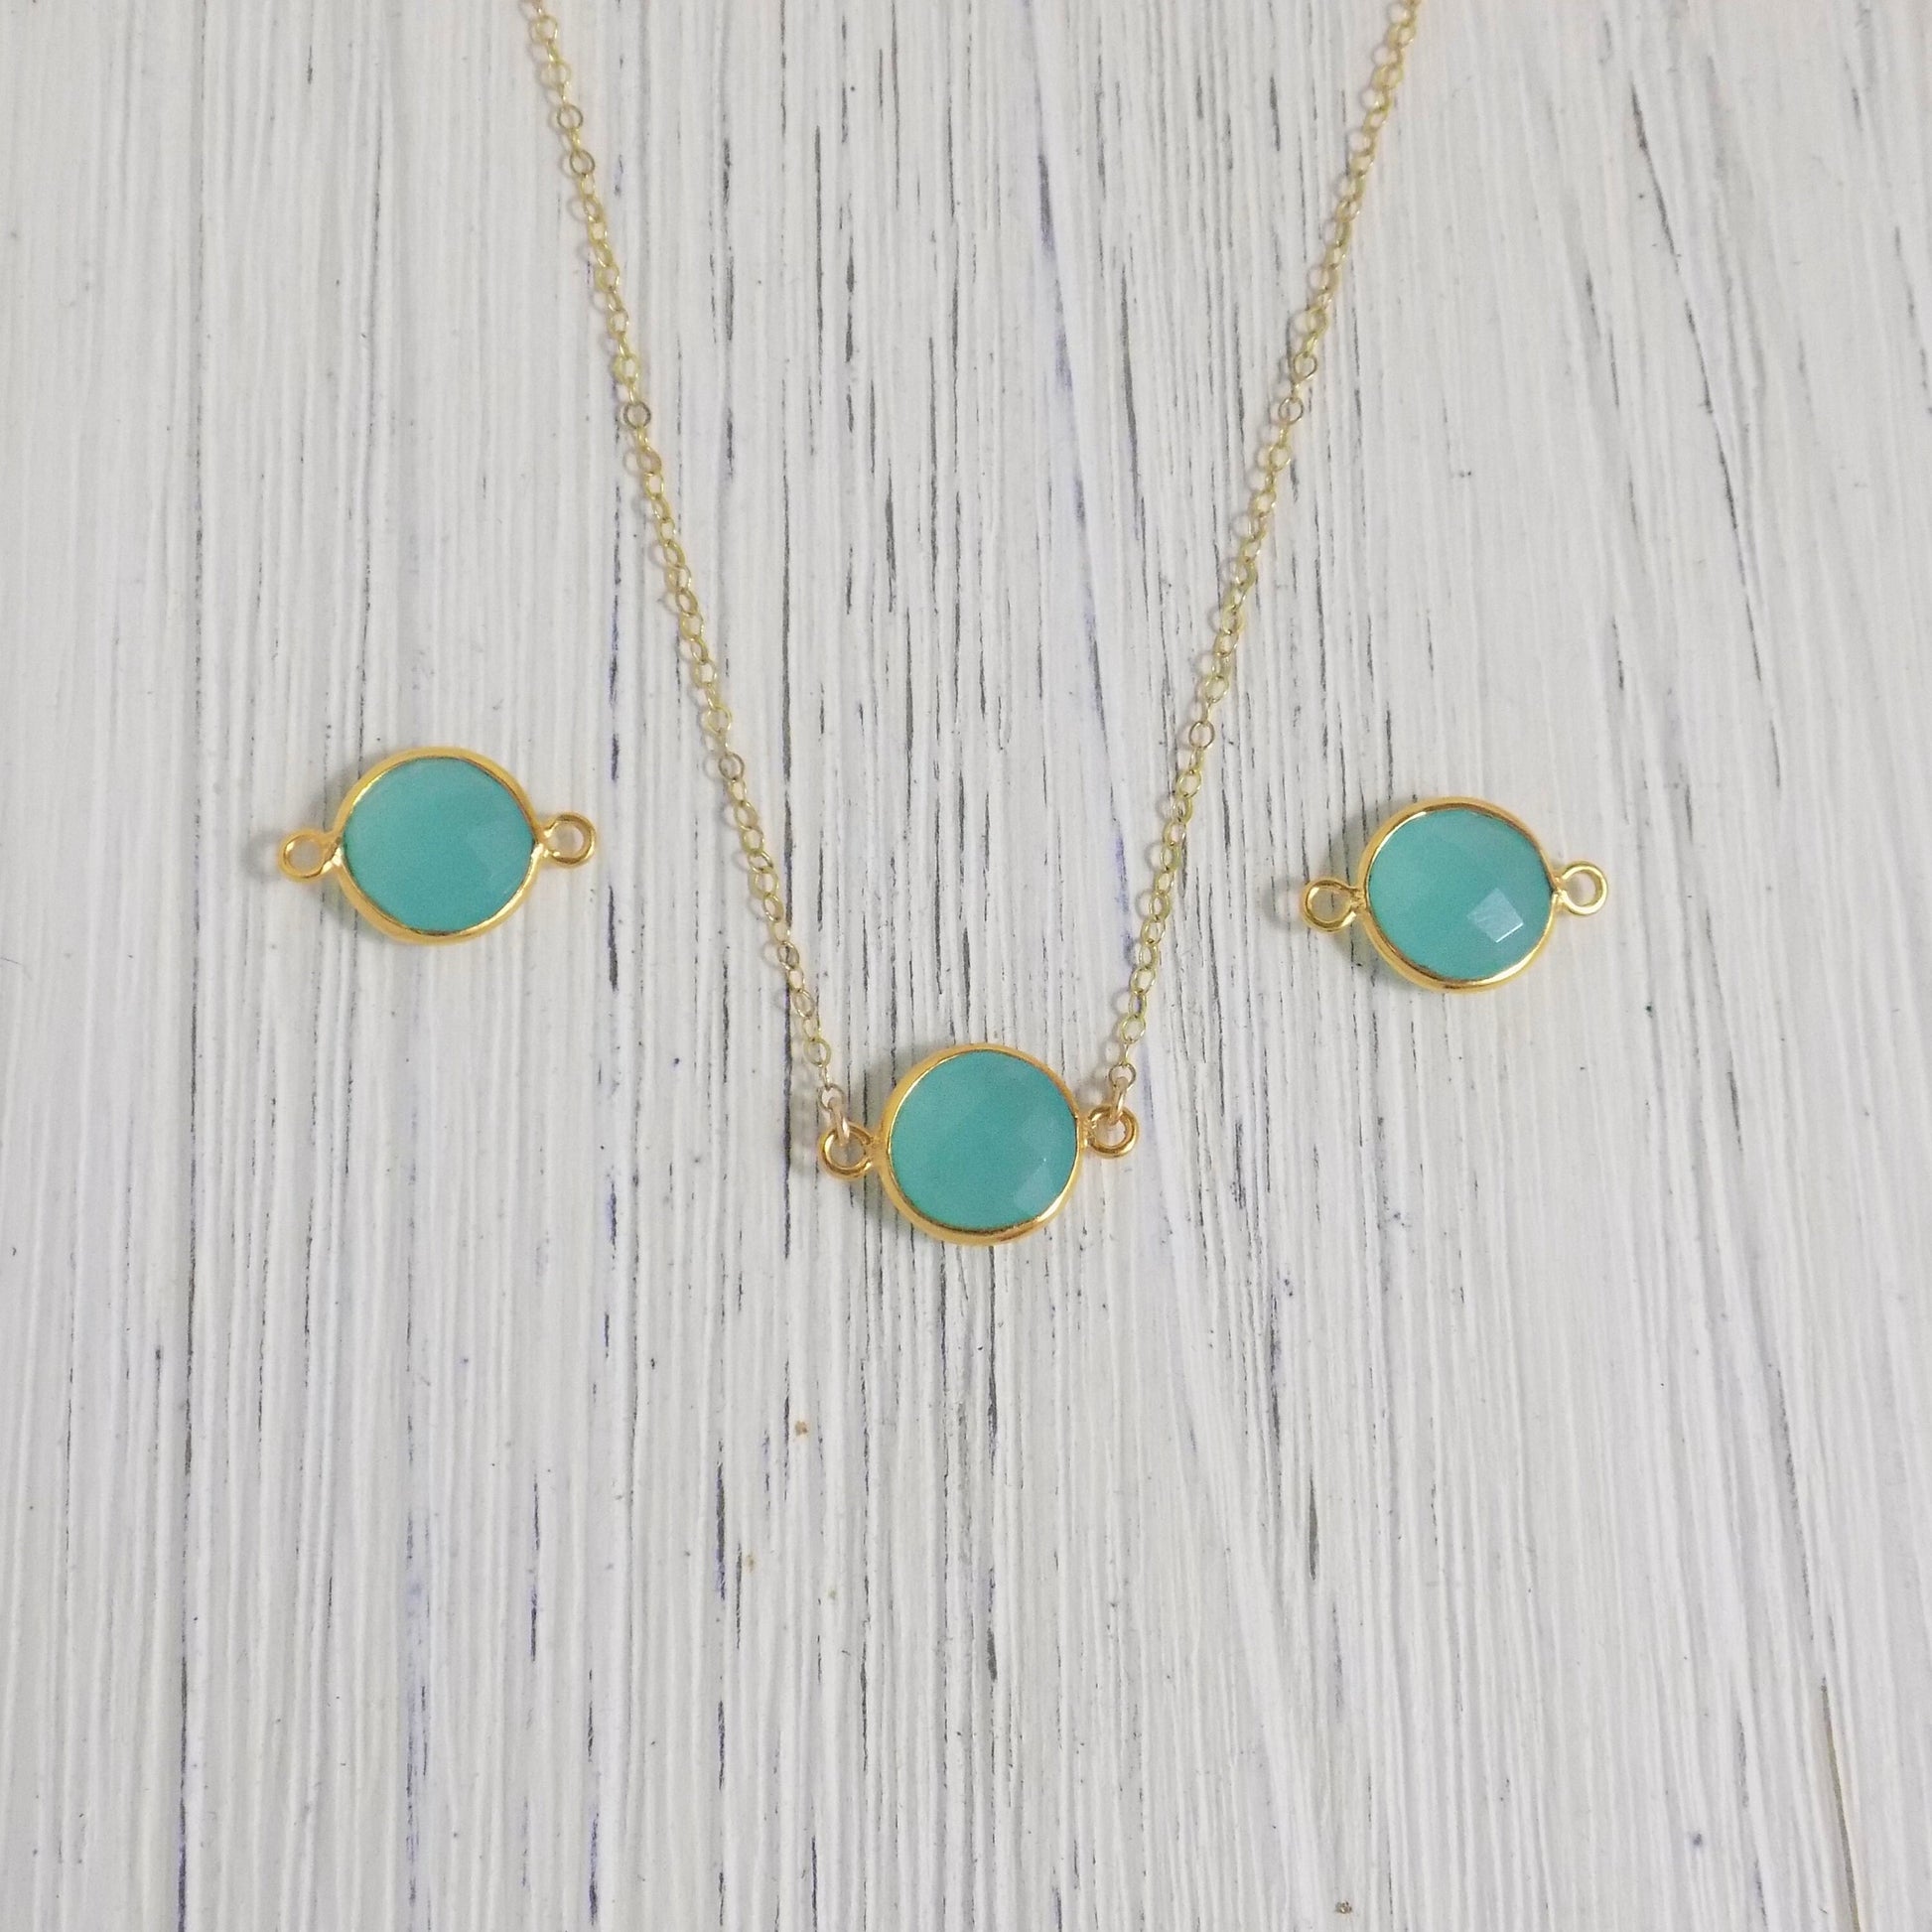 Small Aqua Chalcedony Necklace 14K Gold Filled Chain, Minimalist Gifts For Mom, M6-03